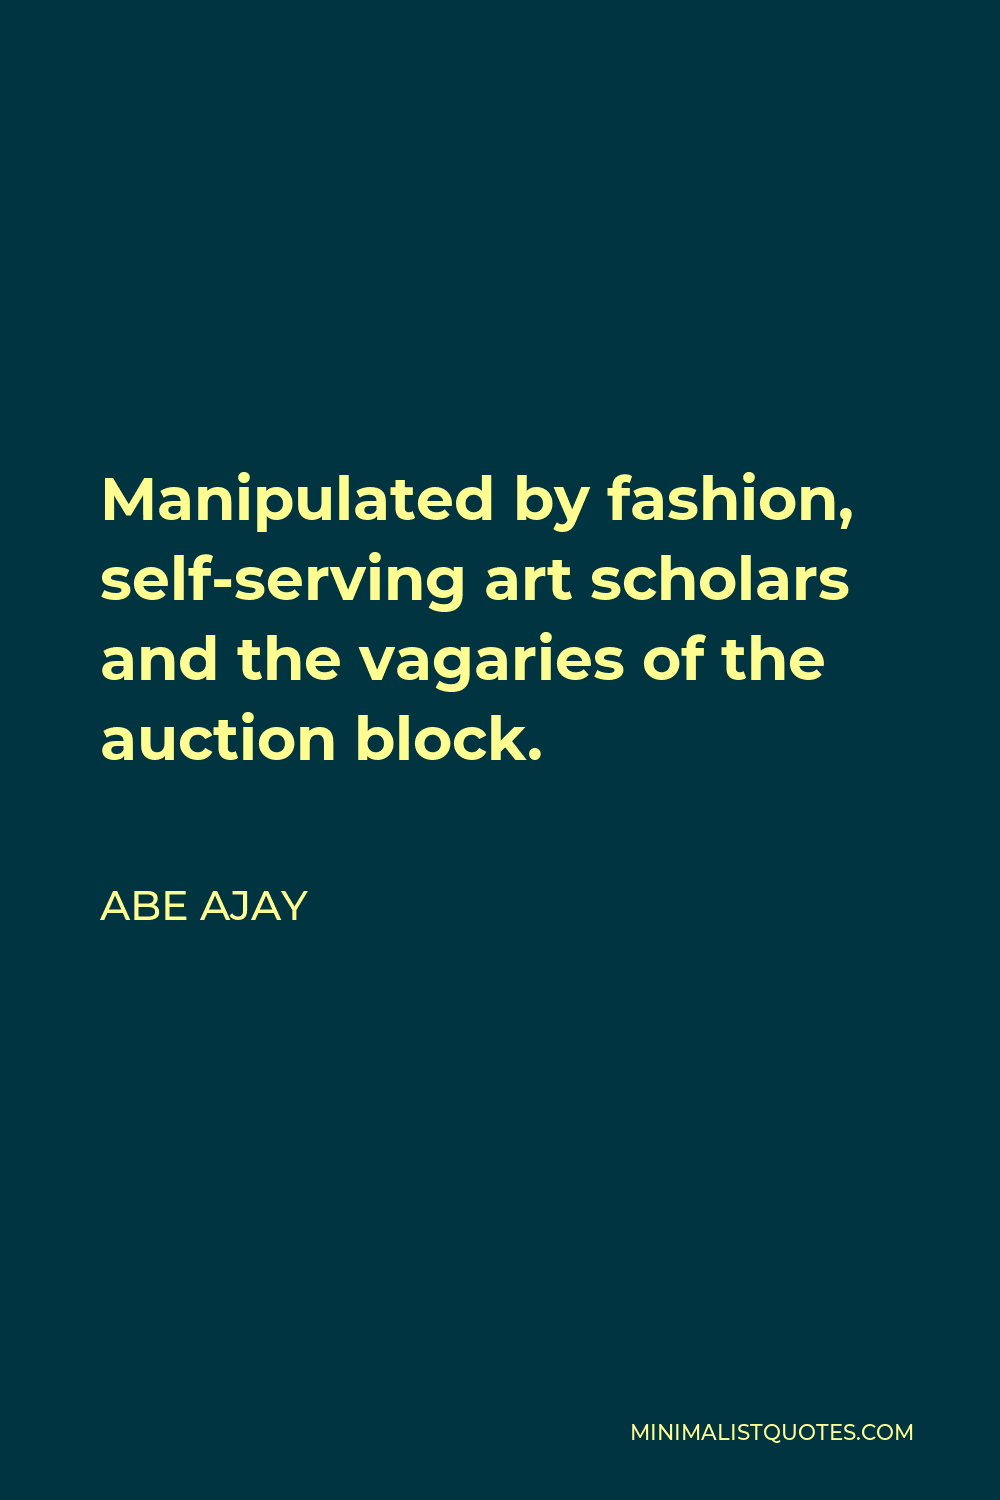 Abe Ajay Quote - Manipulated by fashion, self-serving art scholars and the vagaries of the auction block.